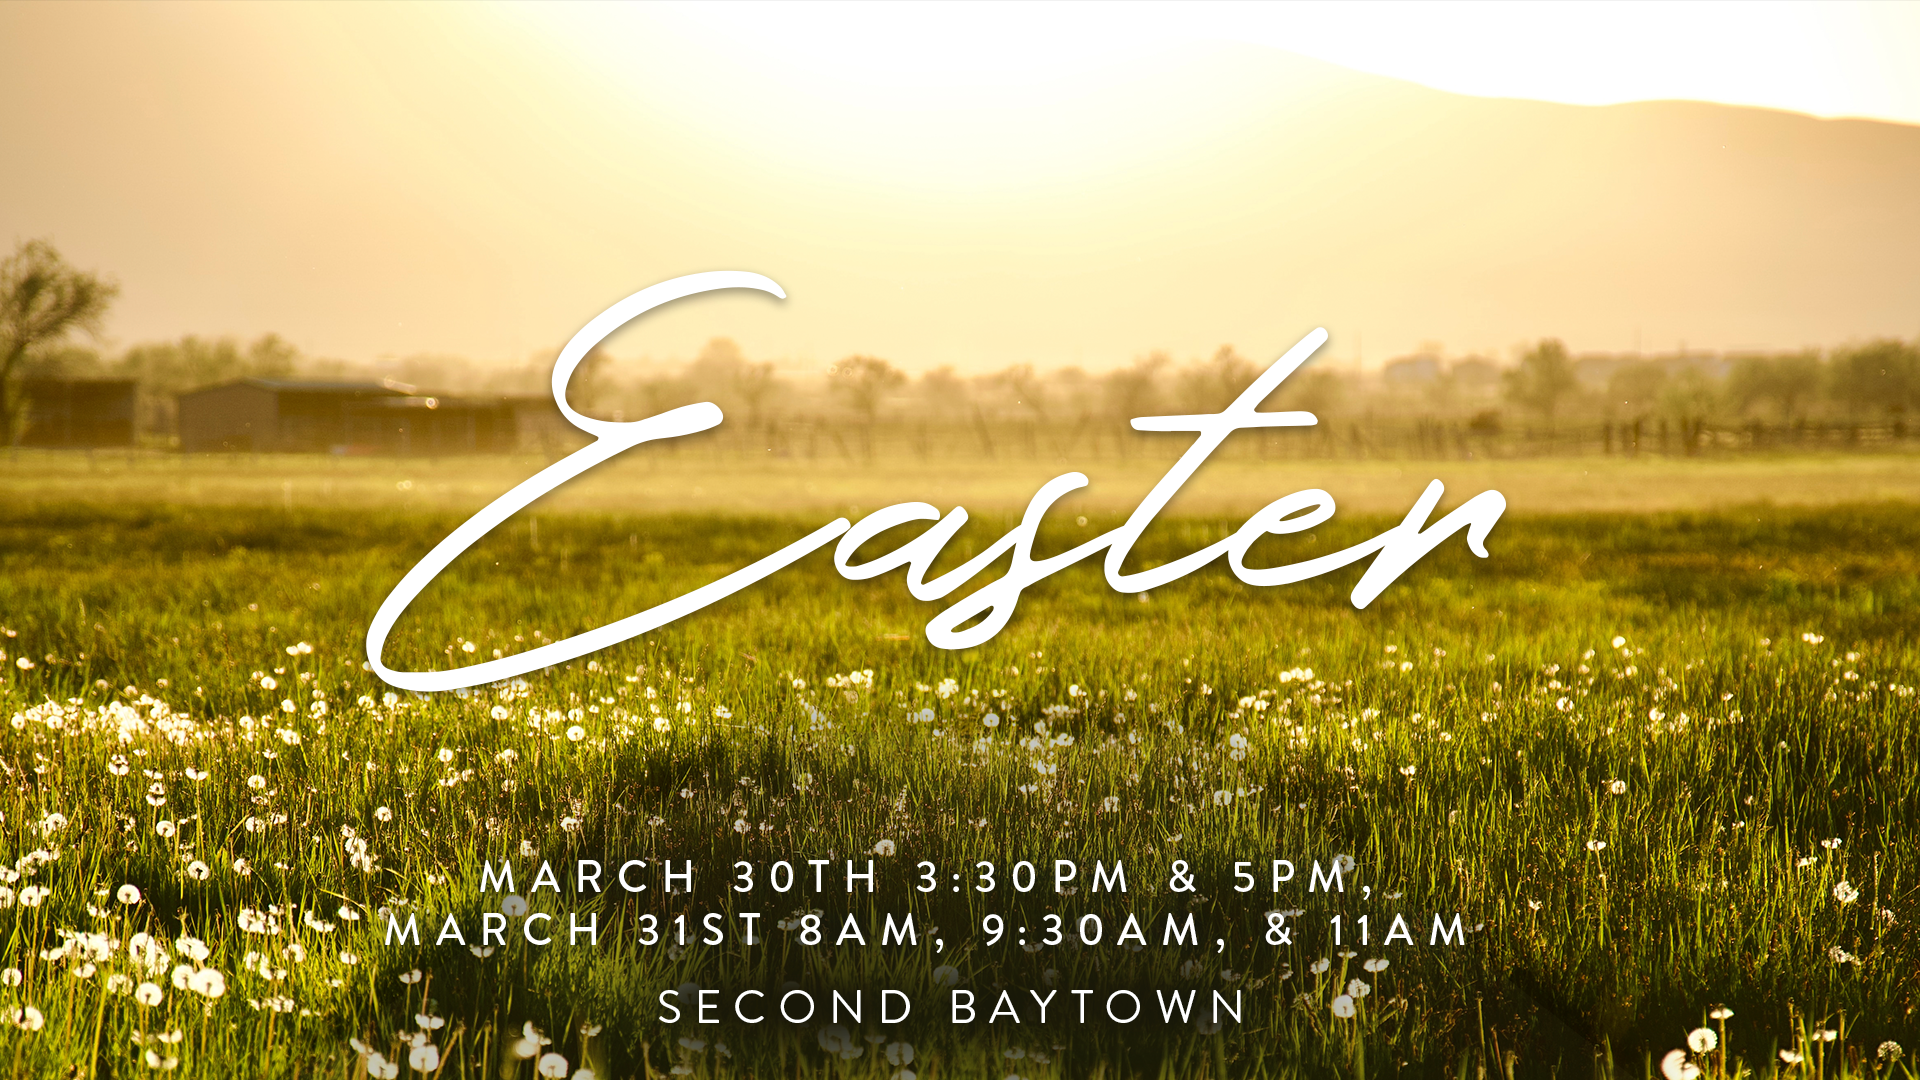 easter at second baytown, march 30 at 3:30pm and 5pm, and march 31 at 8am, 9:30am and 11am